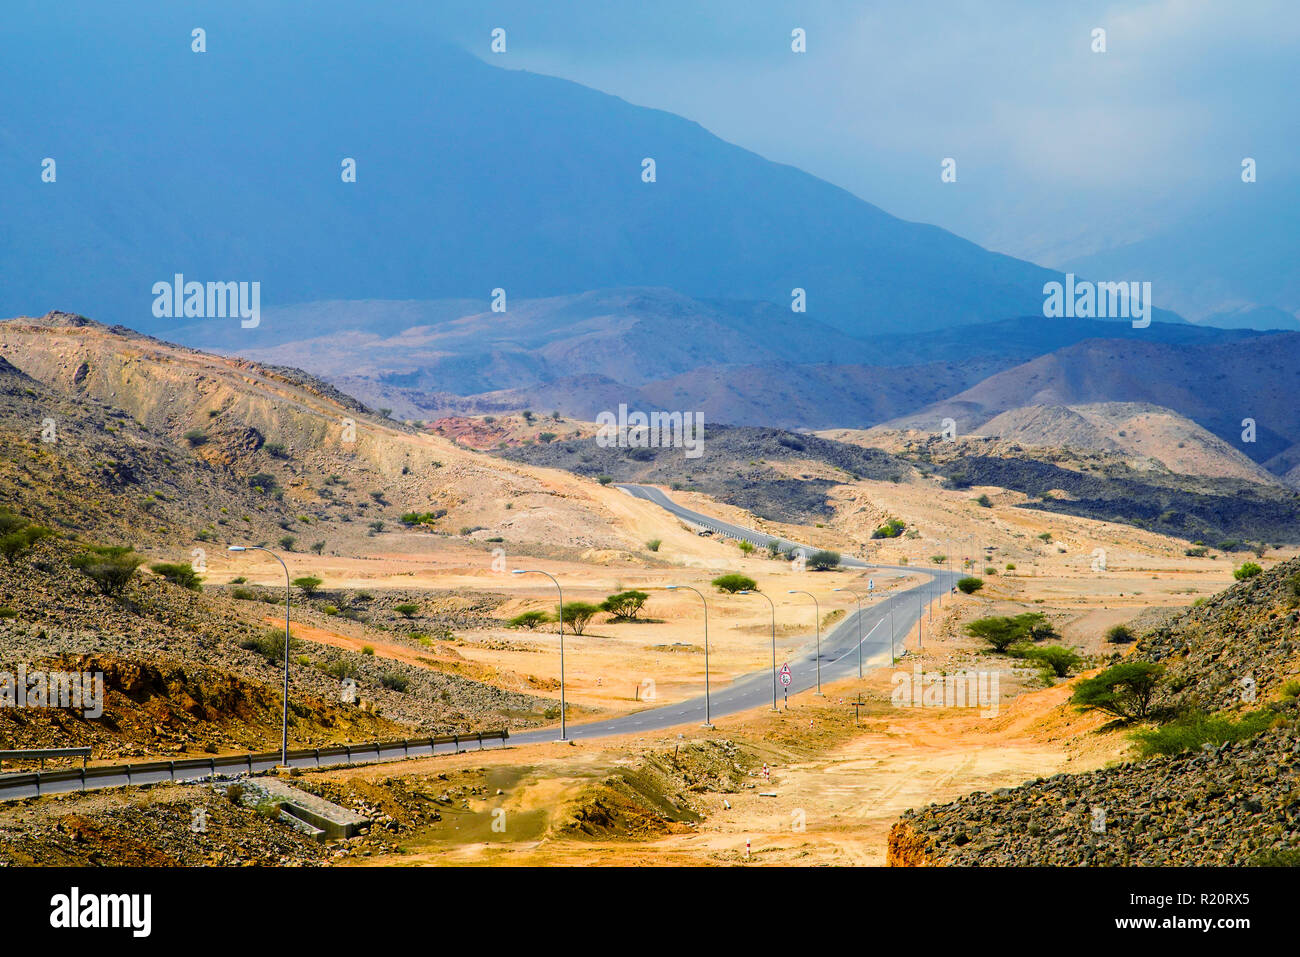 Colorful landscape and road to Wadi Dayqah Dam. Muscat, Oman. Stock Photo